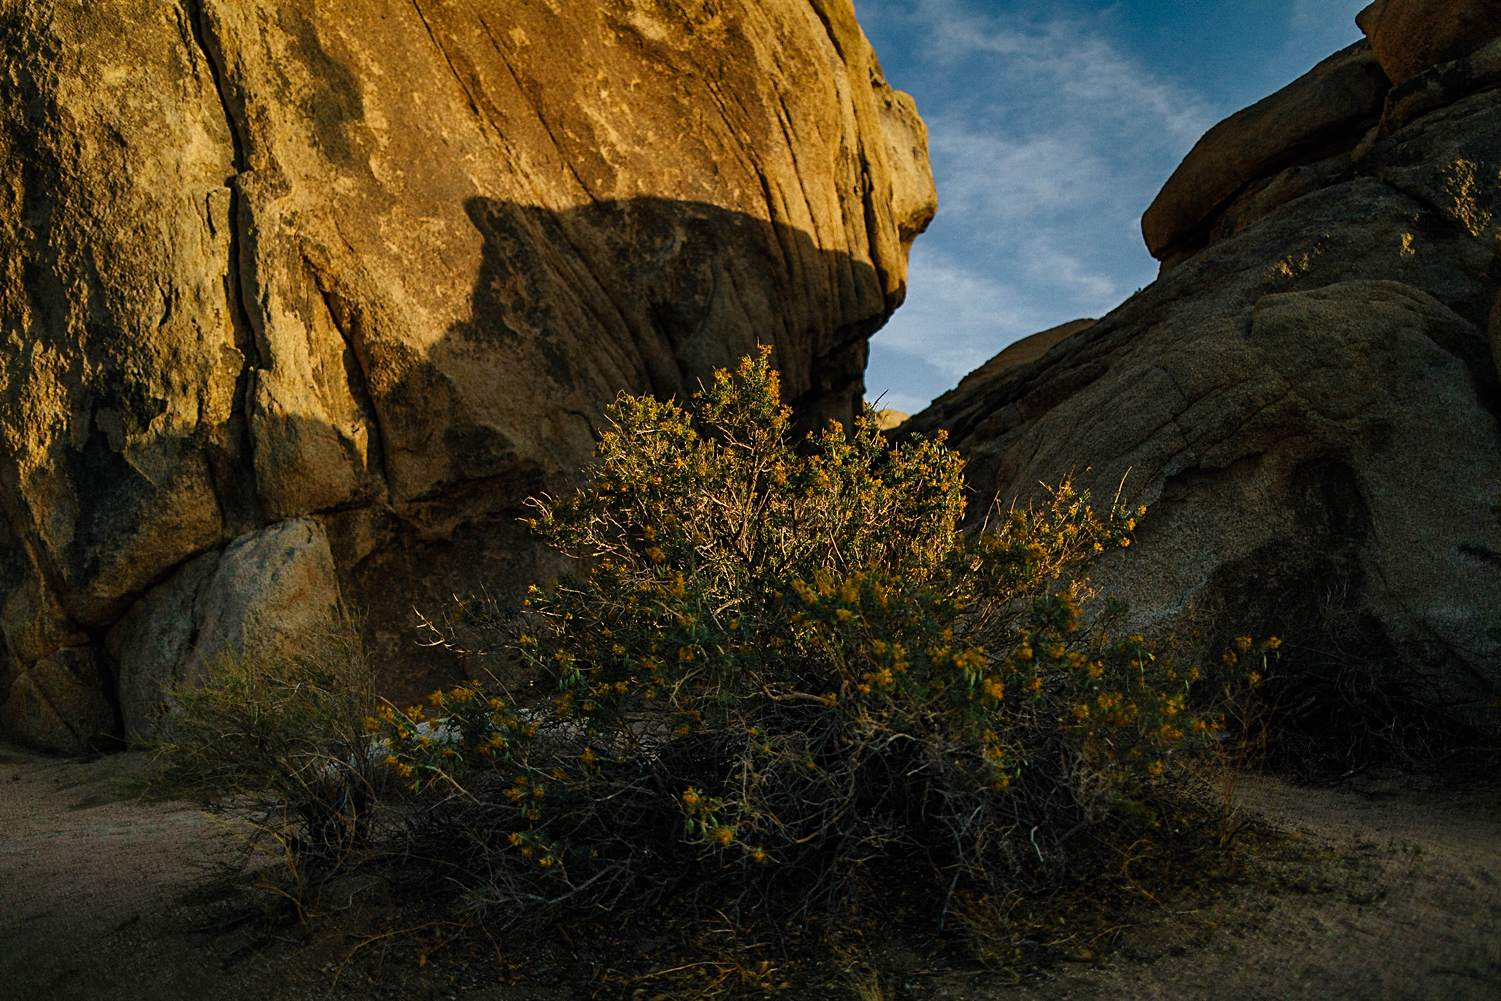 Yellow flowering plan in front of orange rock and blue sky in Joshua Tree National Park